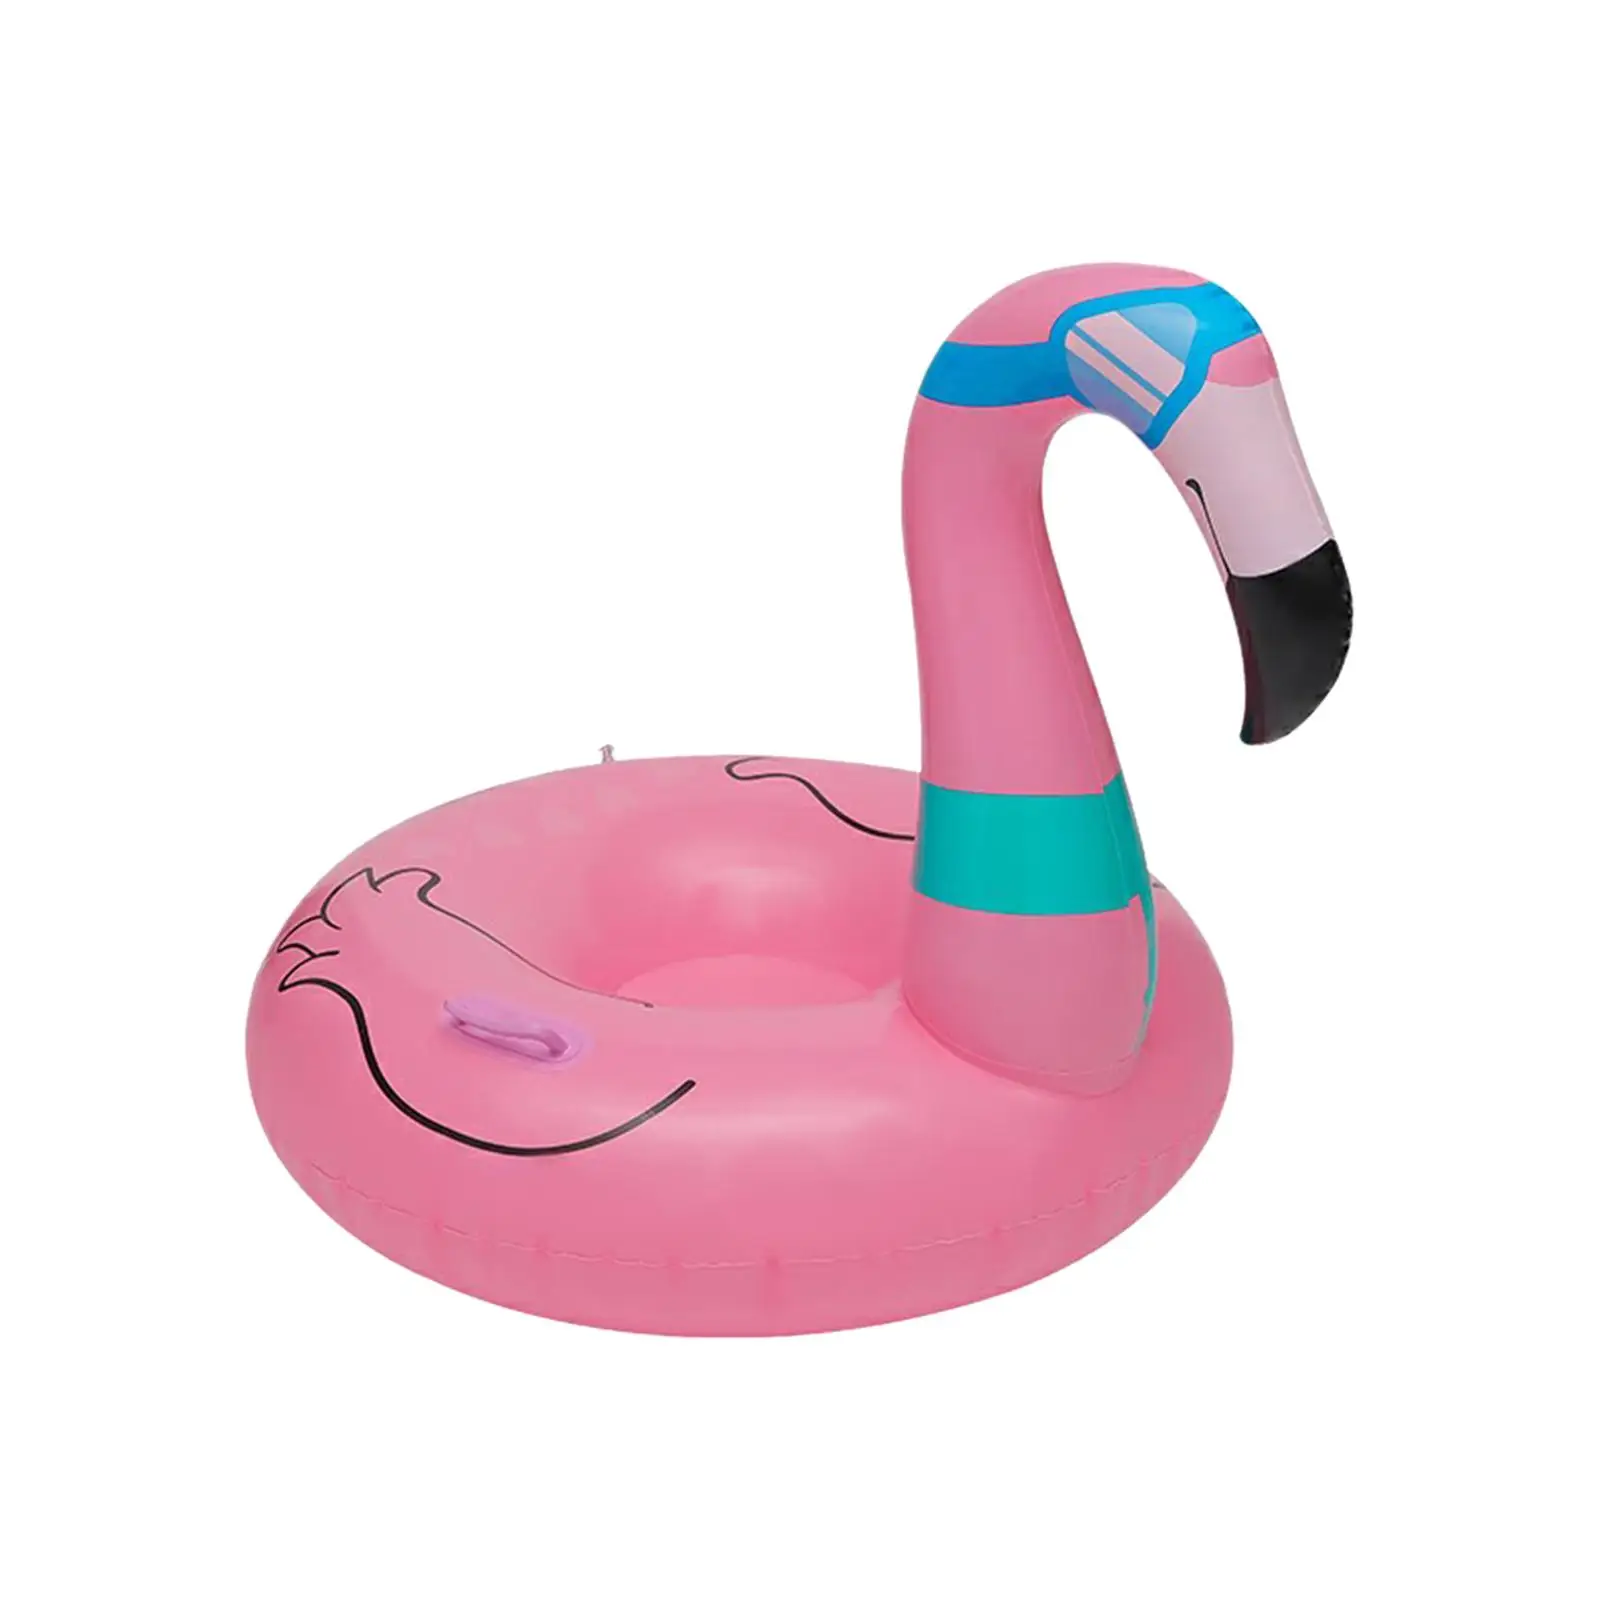 Inflatable Snow Tube Large Flamingo Snow Tube with Sturdy Handles for Outdoor